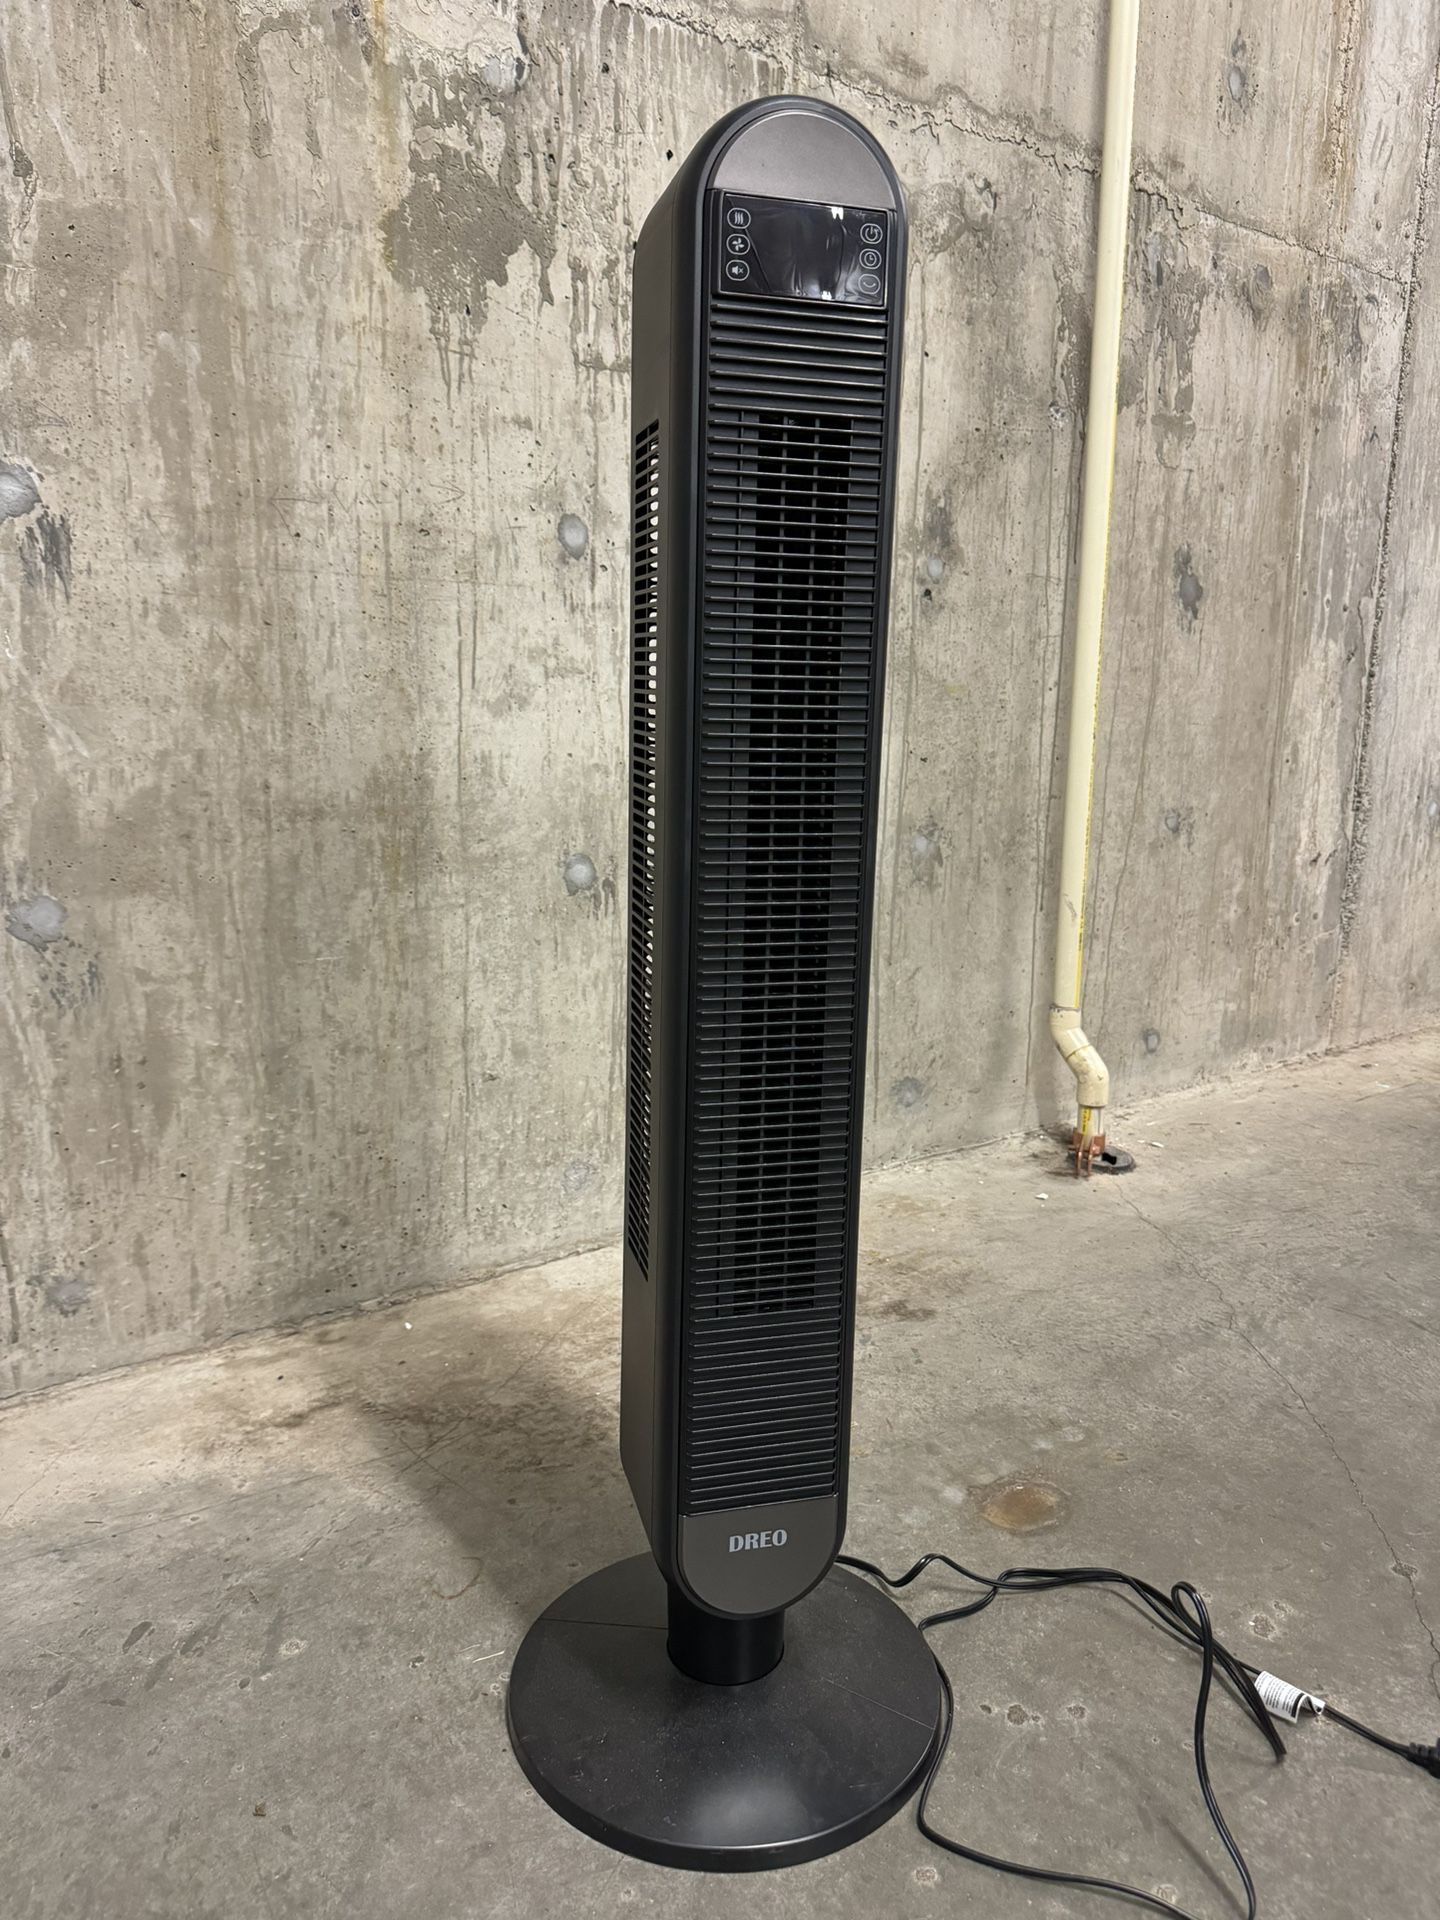 Used For Half A Summer - Dreo Tower Fan